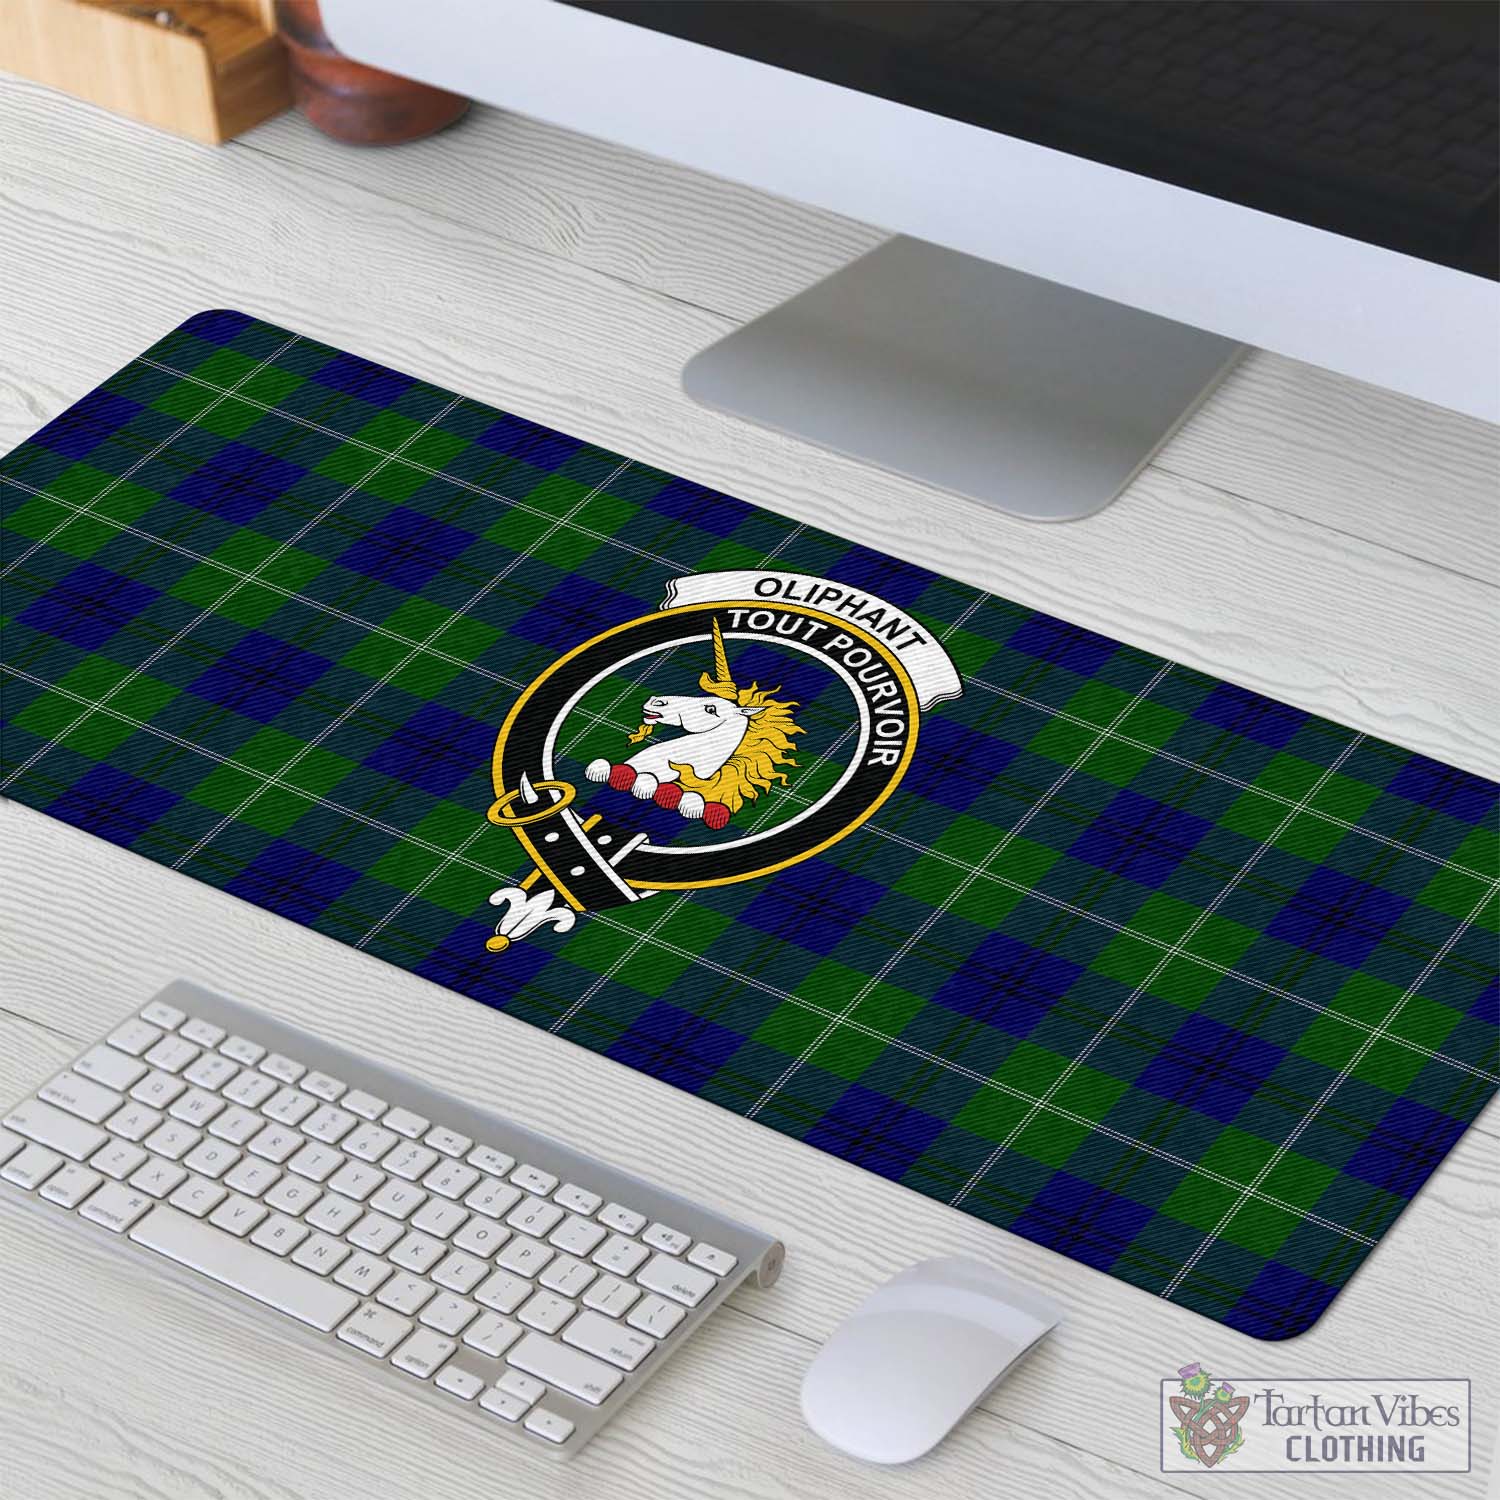 Tartan Vibes Clothing Oliphant Modern Tartan Mouse Pad with Family Crest